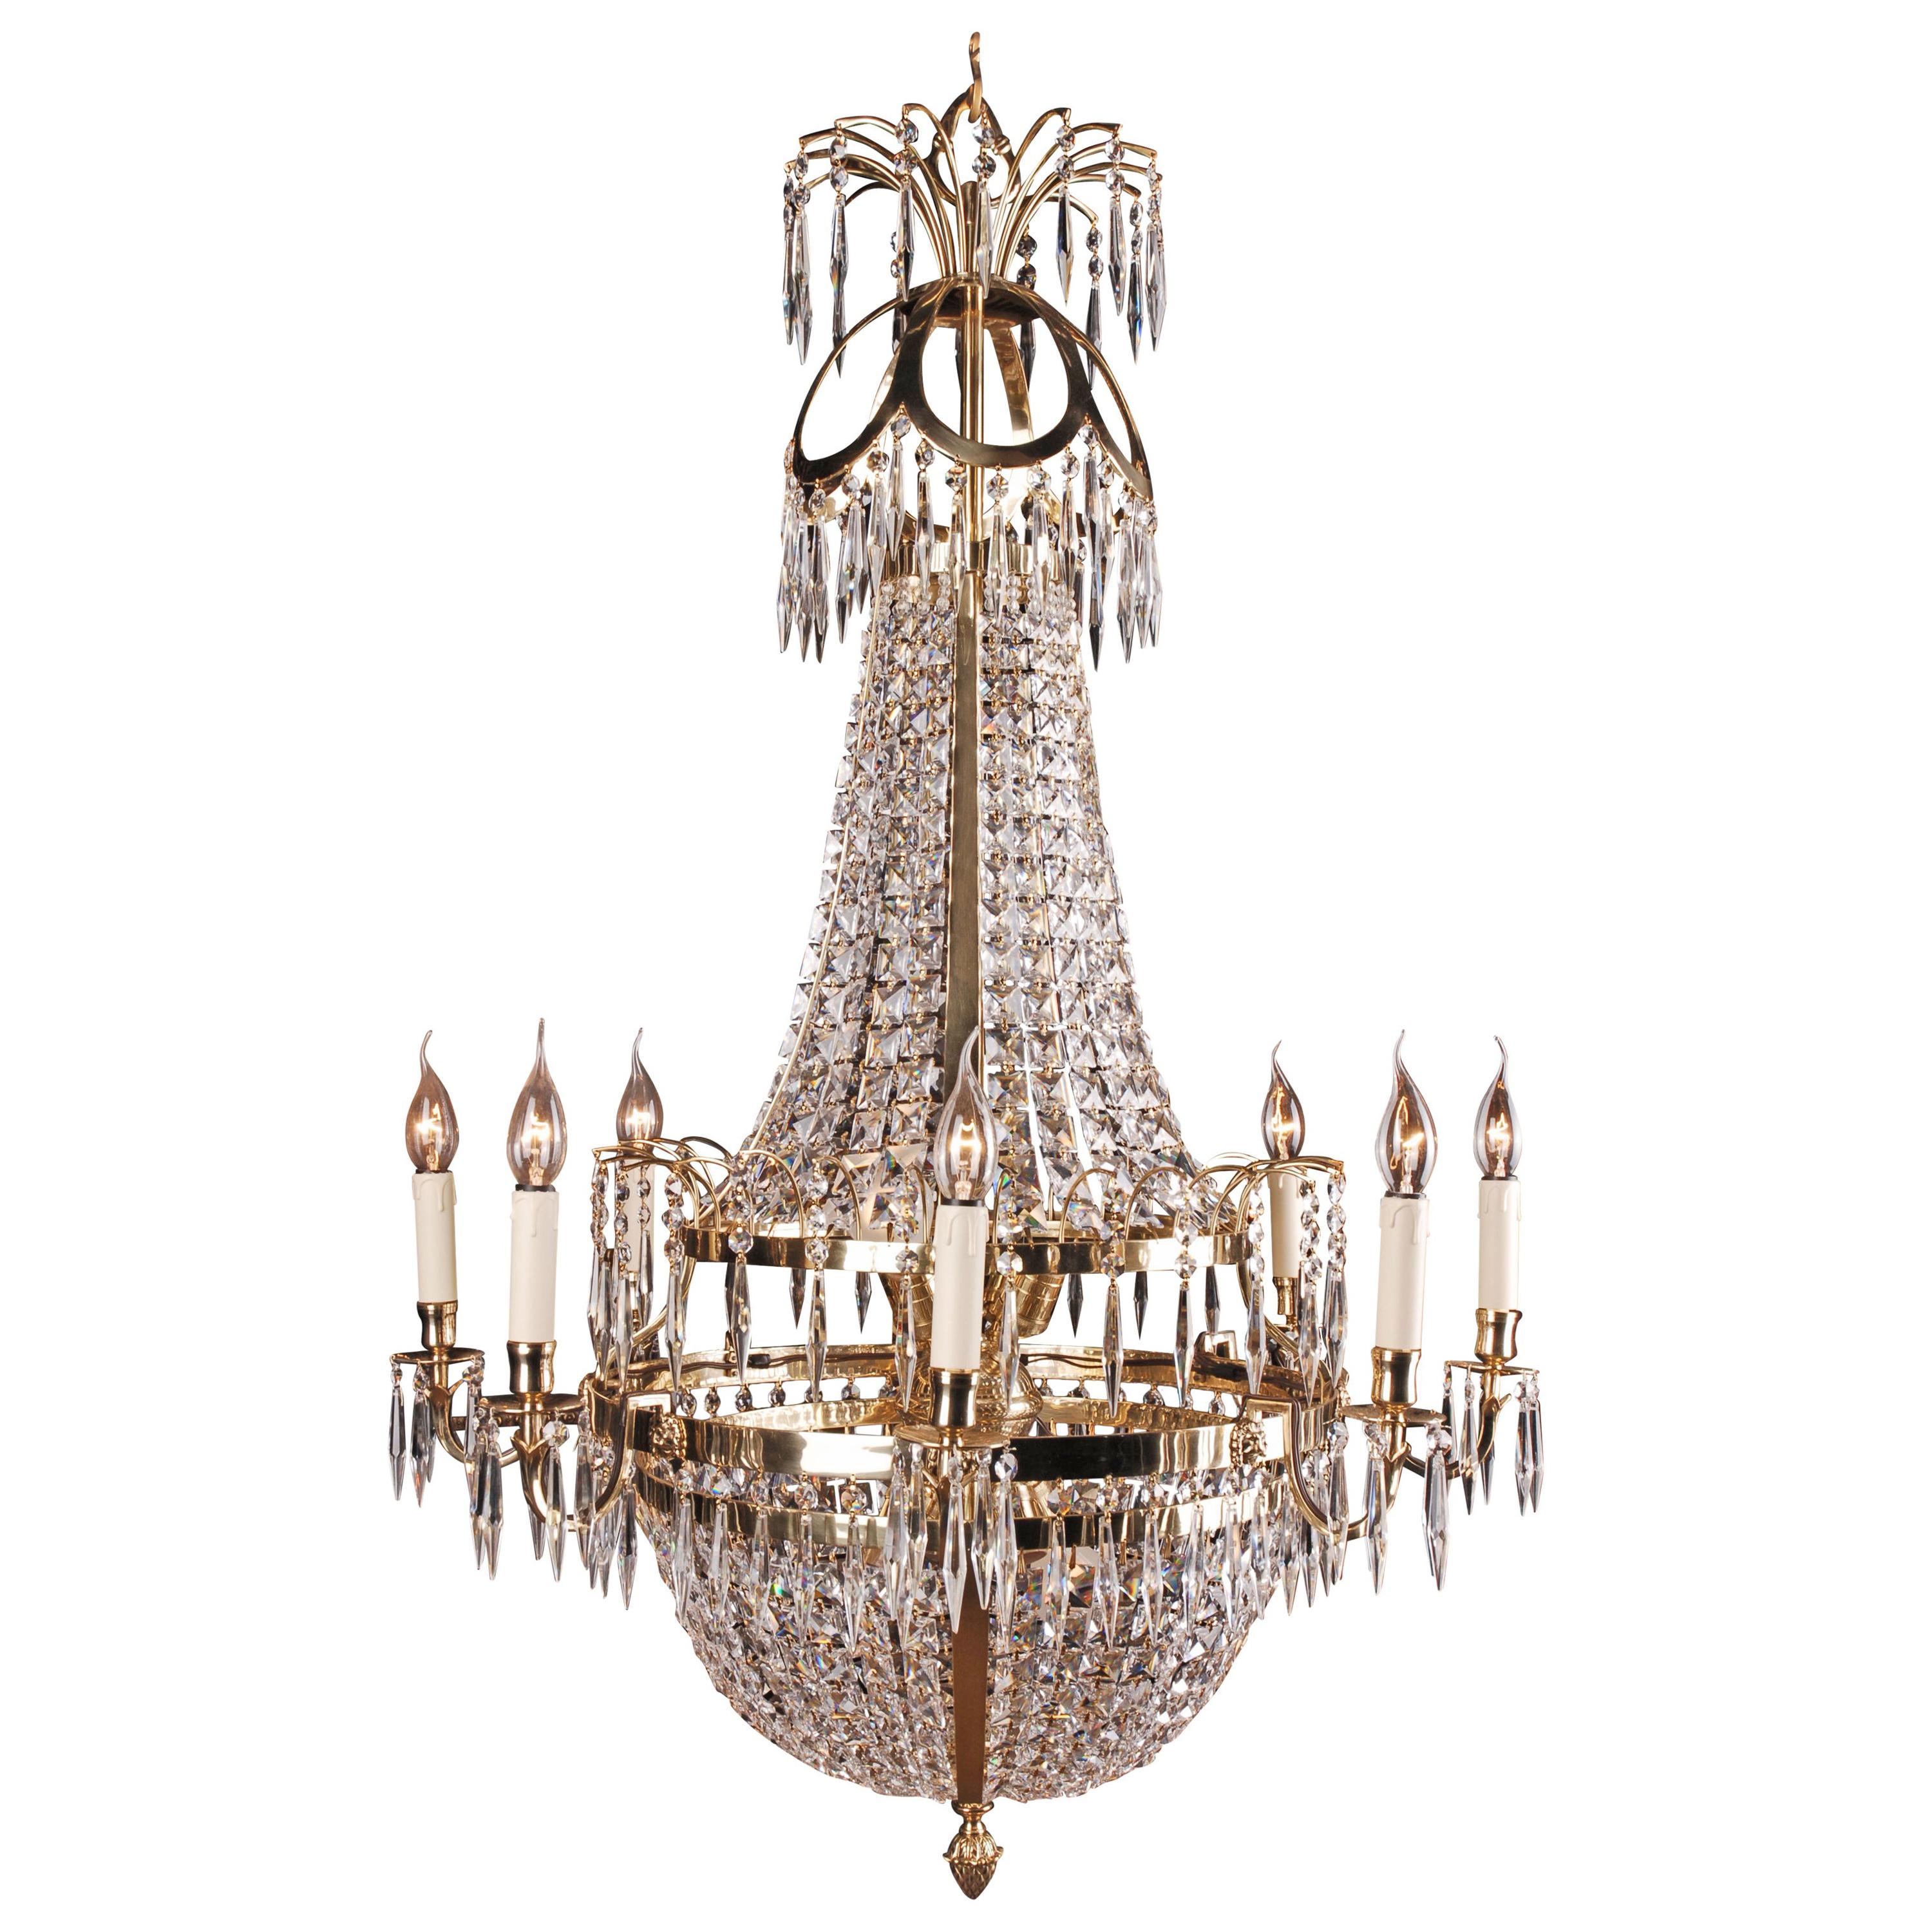 Swedish Empire Ceiling Chandelier in Classicist Style